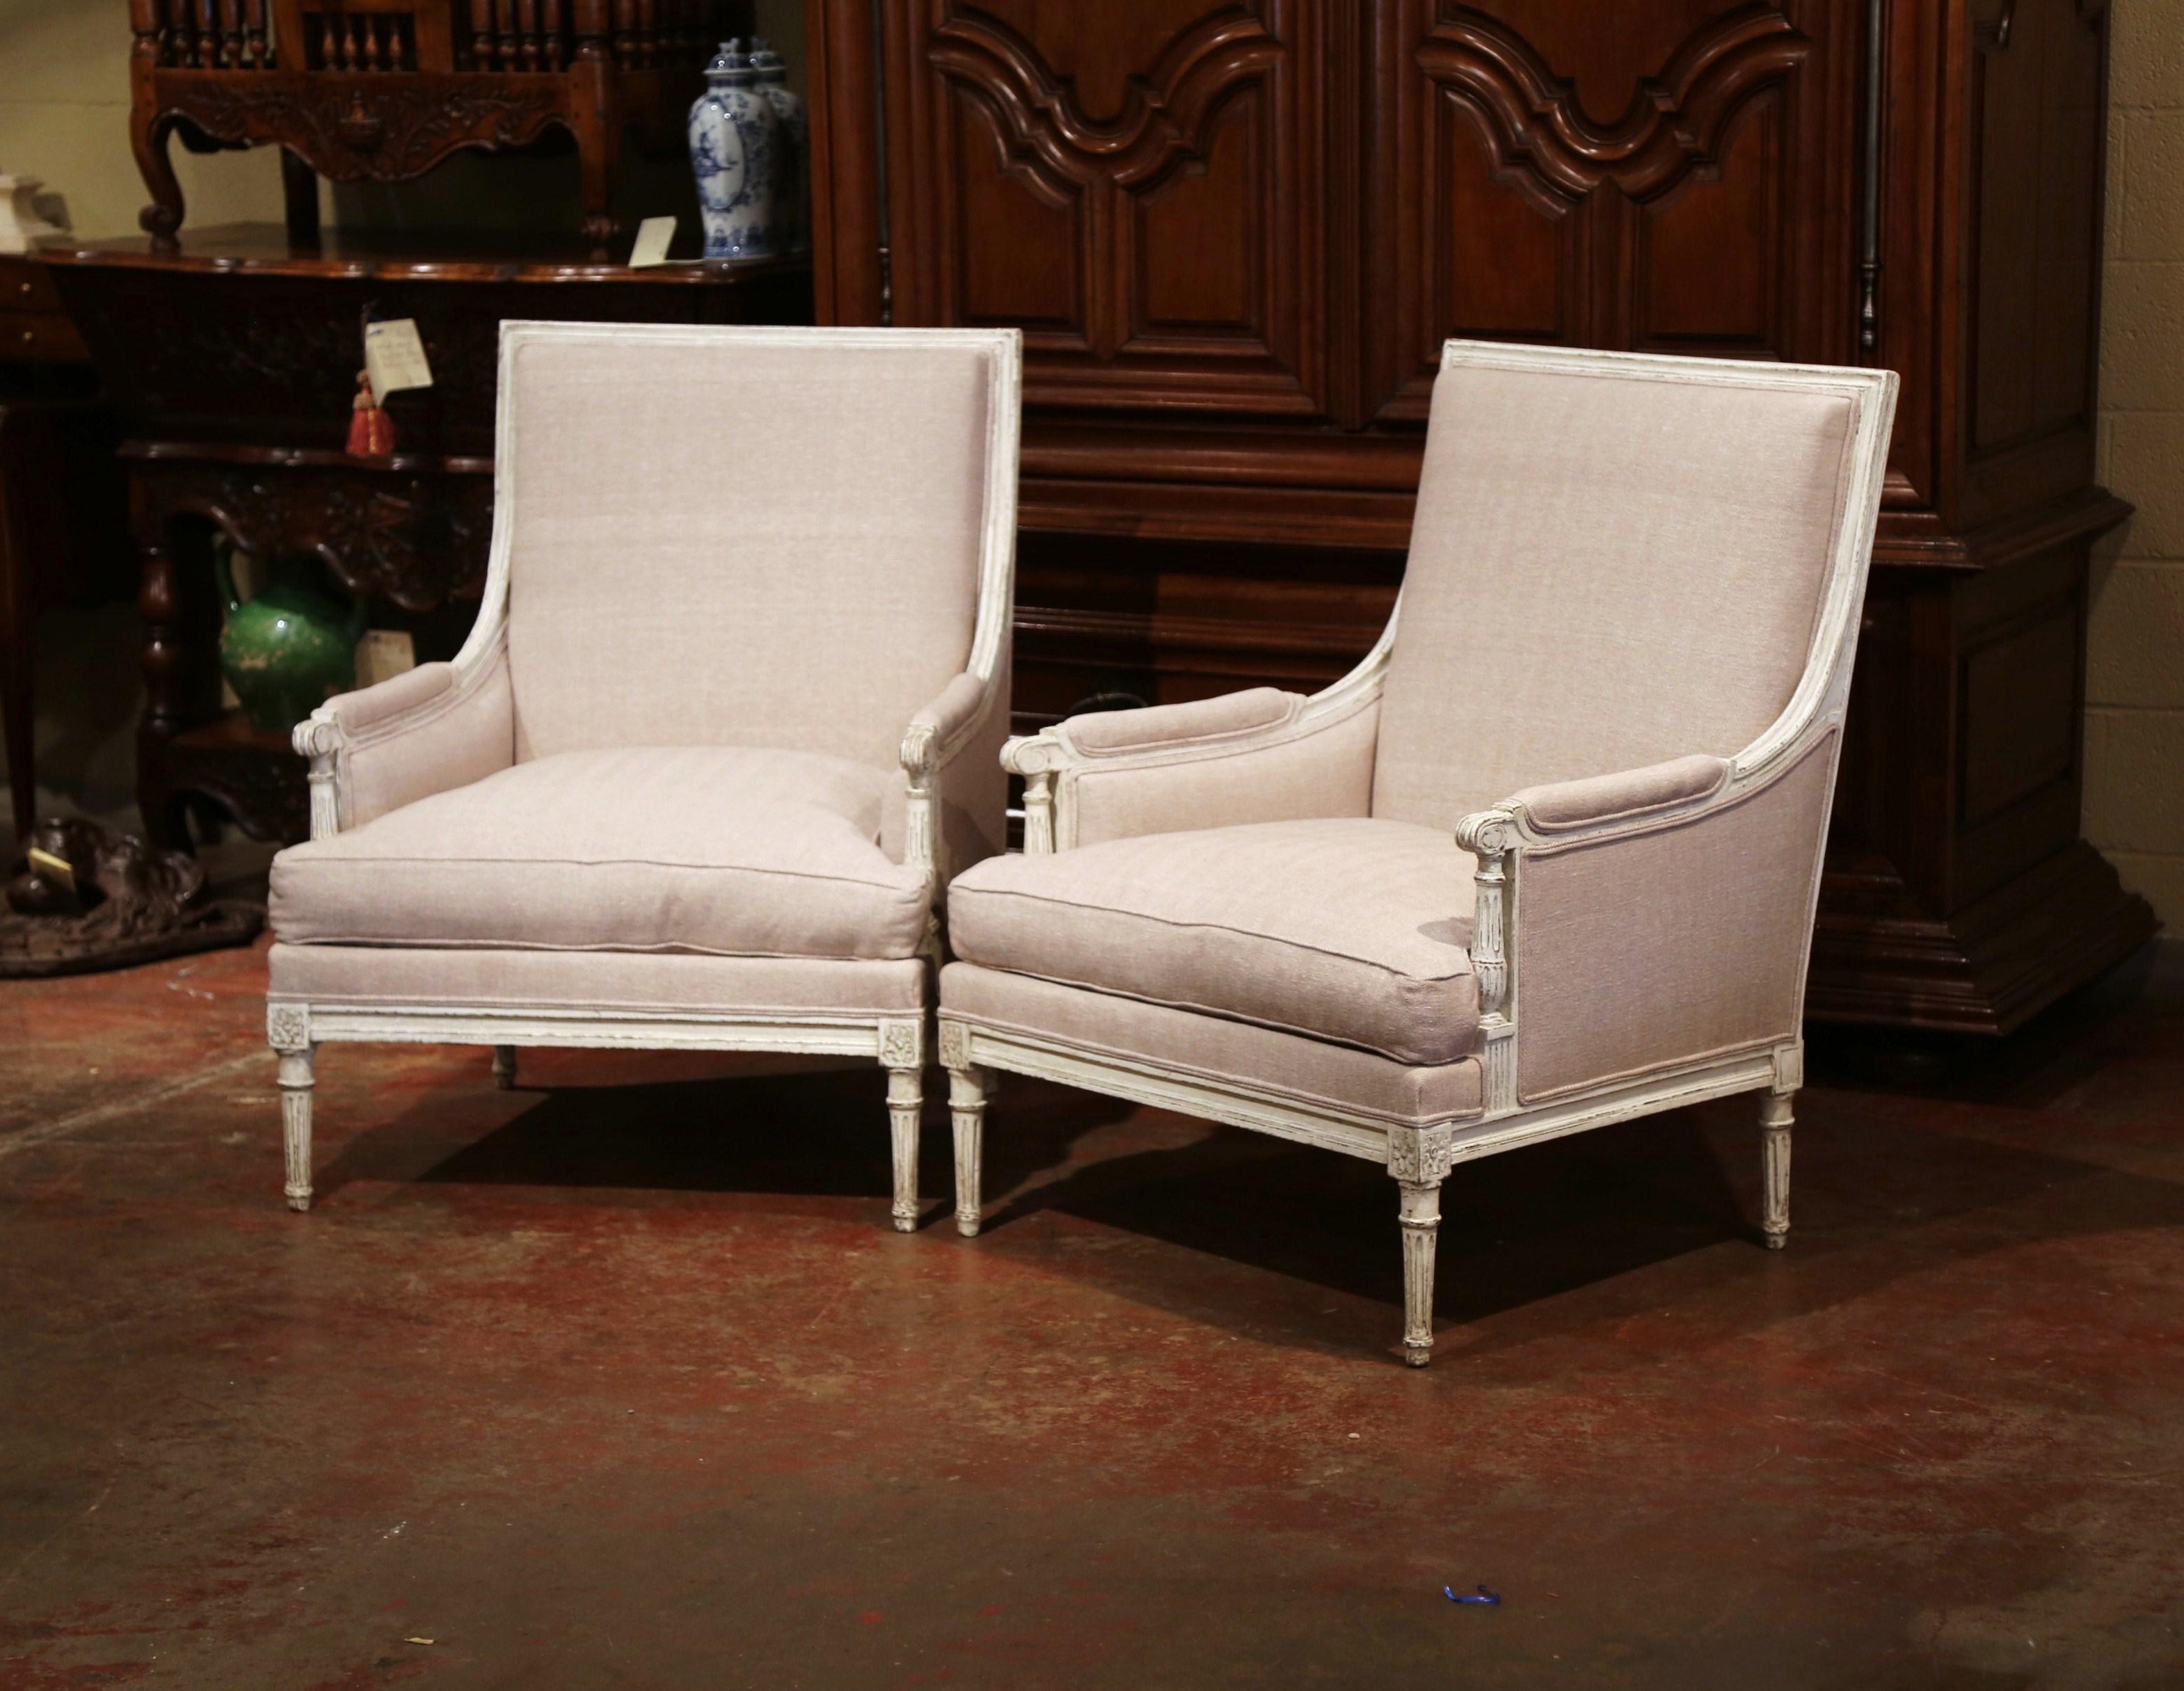 Complete your formal living room or master bedroom suite with this elegant and straight line pair of antique armchairs. Created in France, circa 1880, the large, Classic chairs have a wide and square back for a comfortable seat. The traditional